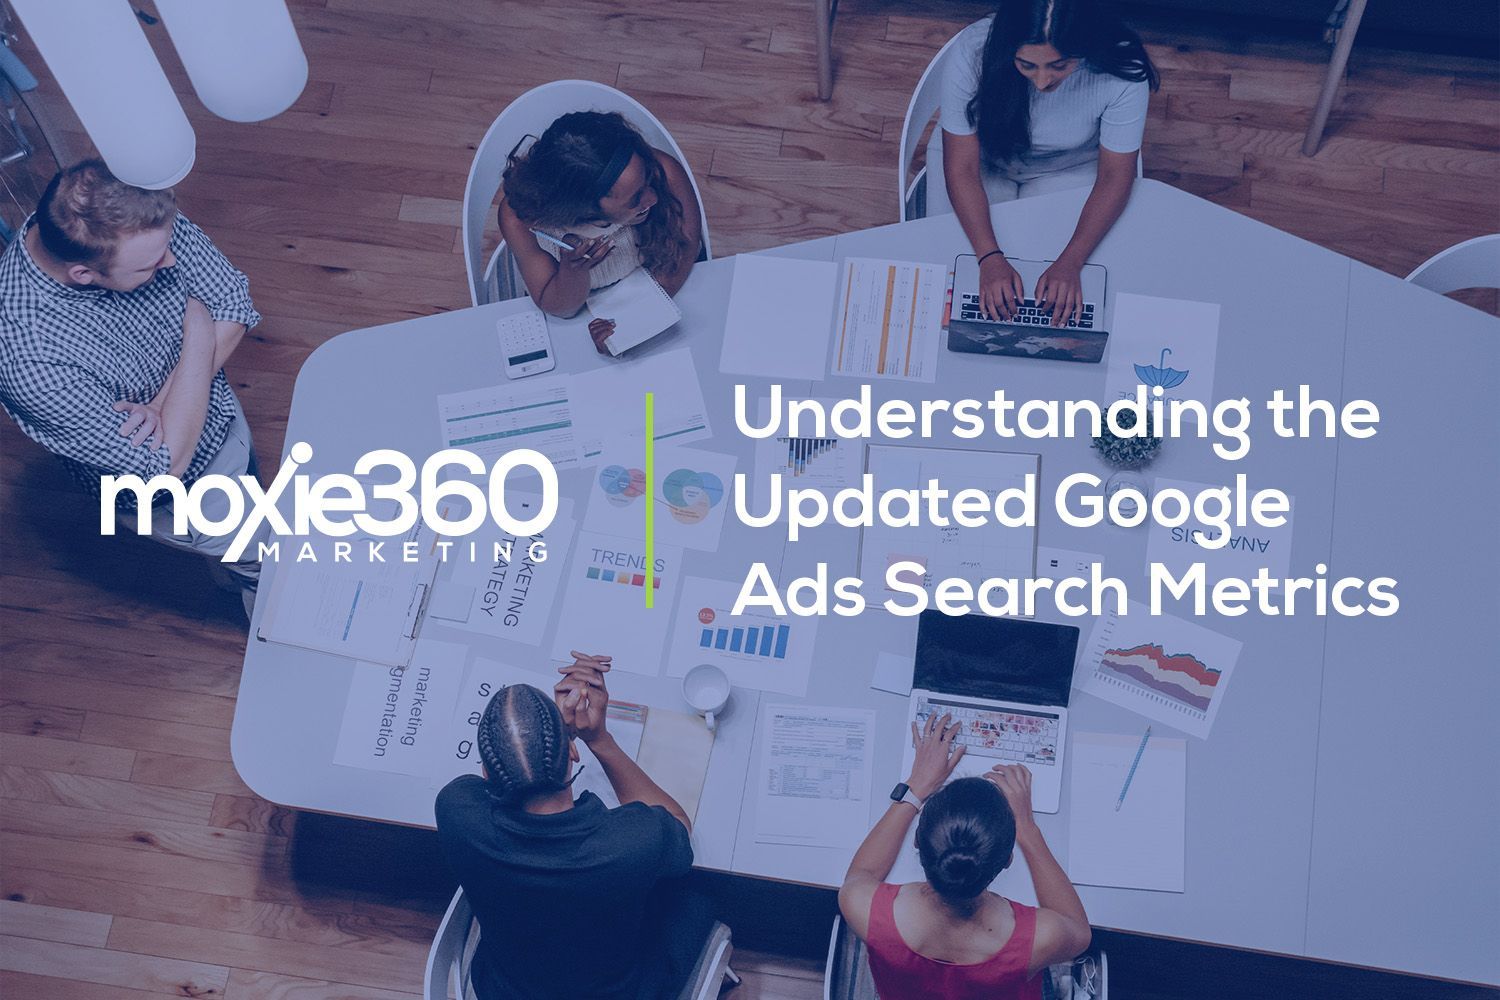 Google Ads Metrics Update: What Marketers Need to Know | Moxie360 Marketing